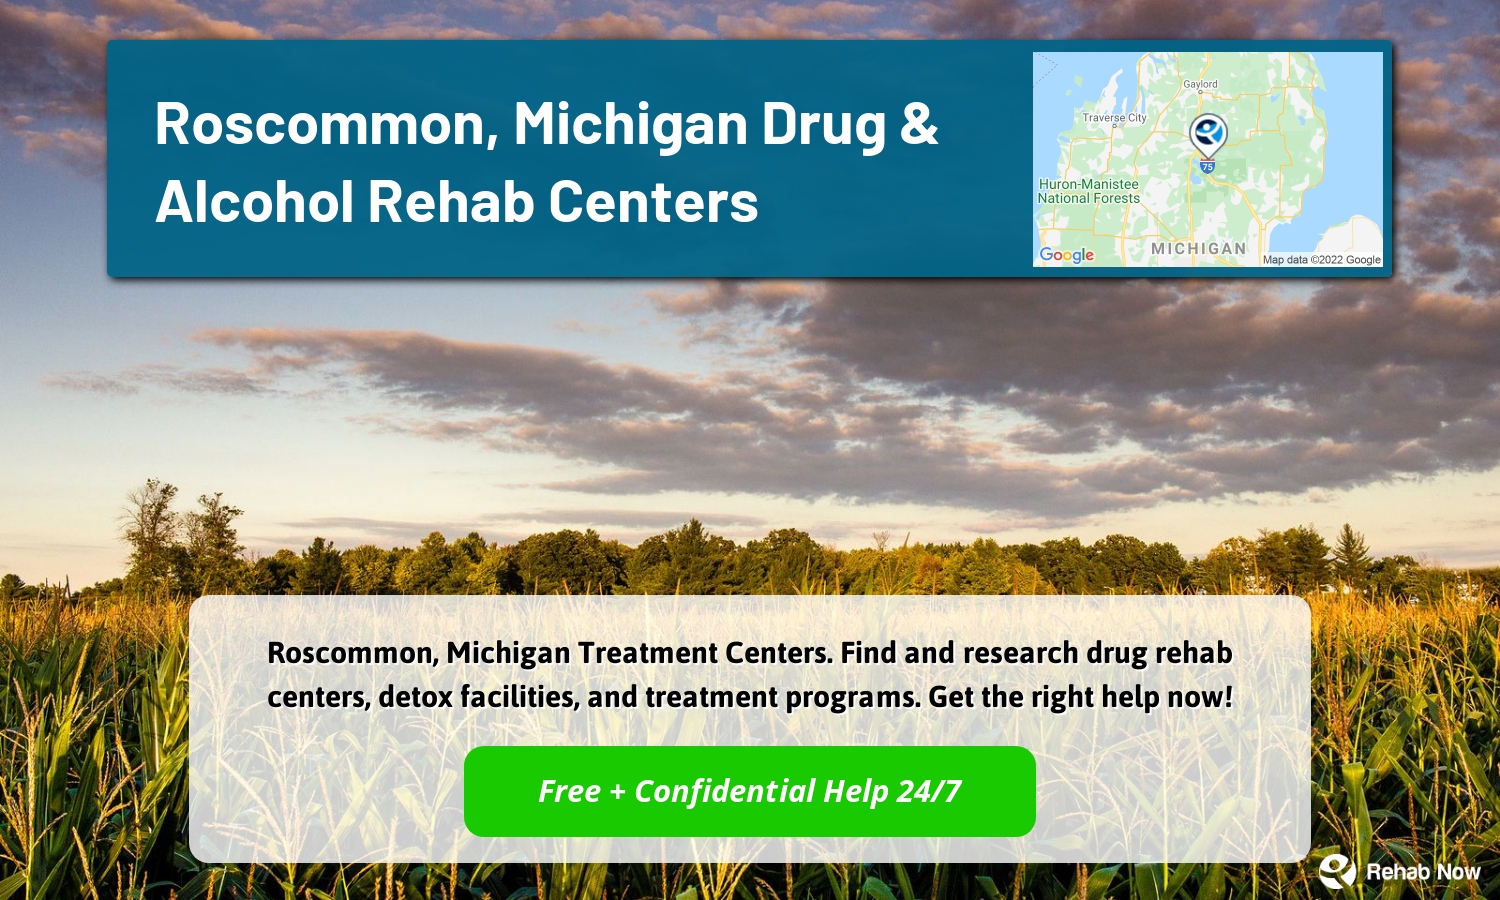 Roscommon, Michigan Treatment Centers. Find and research drug rehab centers, detox facilities, and treatment programs. Get the right help now!